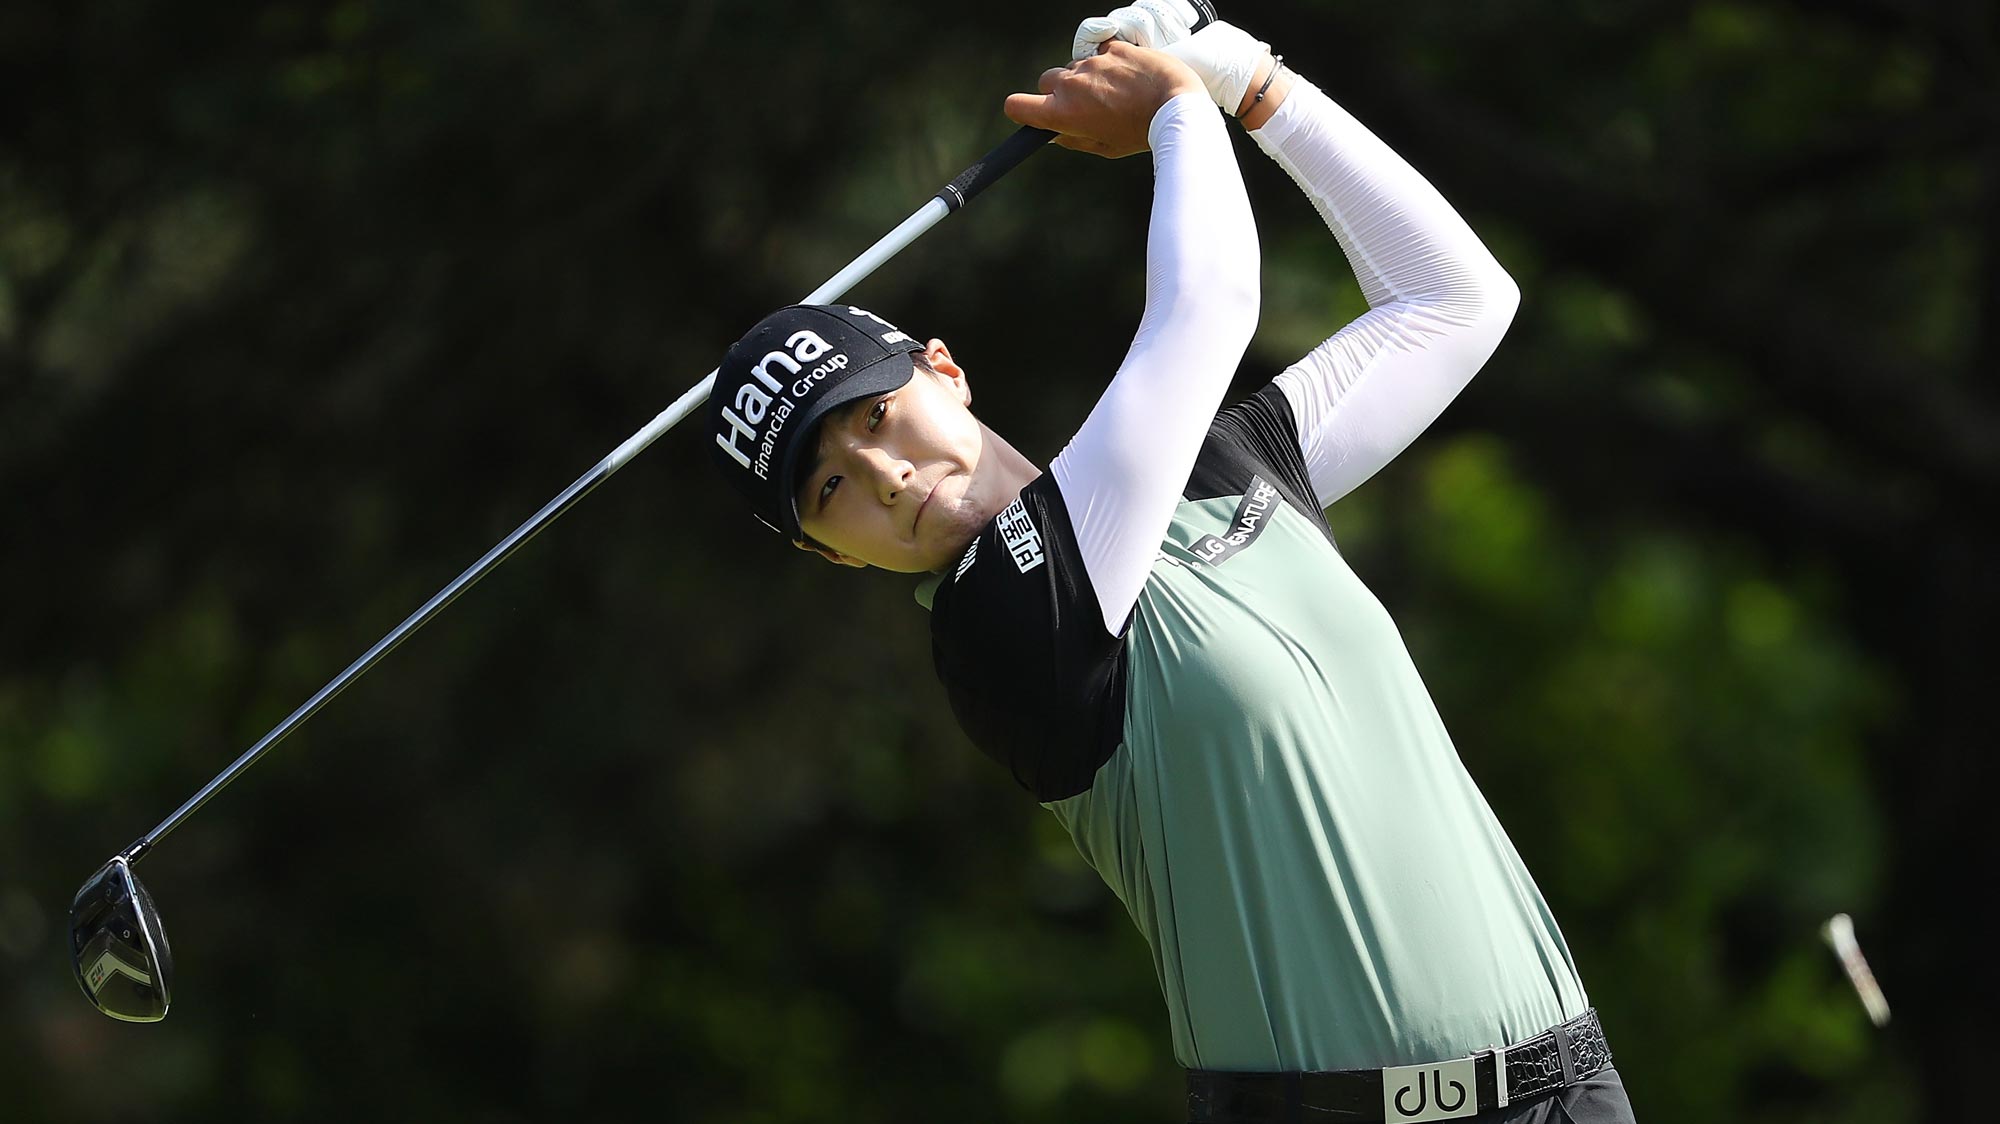 Sung Hyun Park of Korea hits her drive on the second hole during the final round of the 2018 KPMG Women's PGA Championship